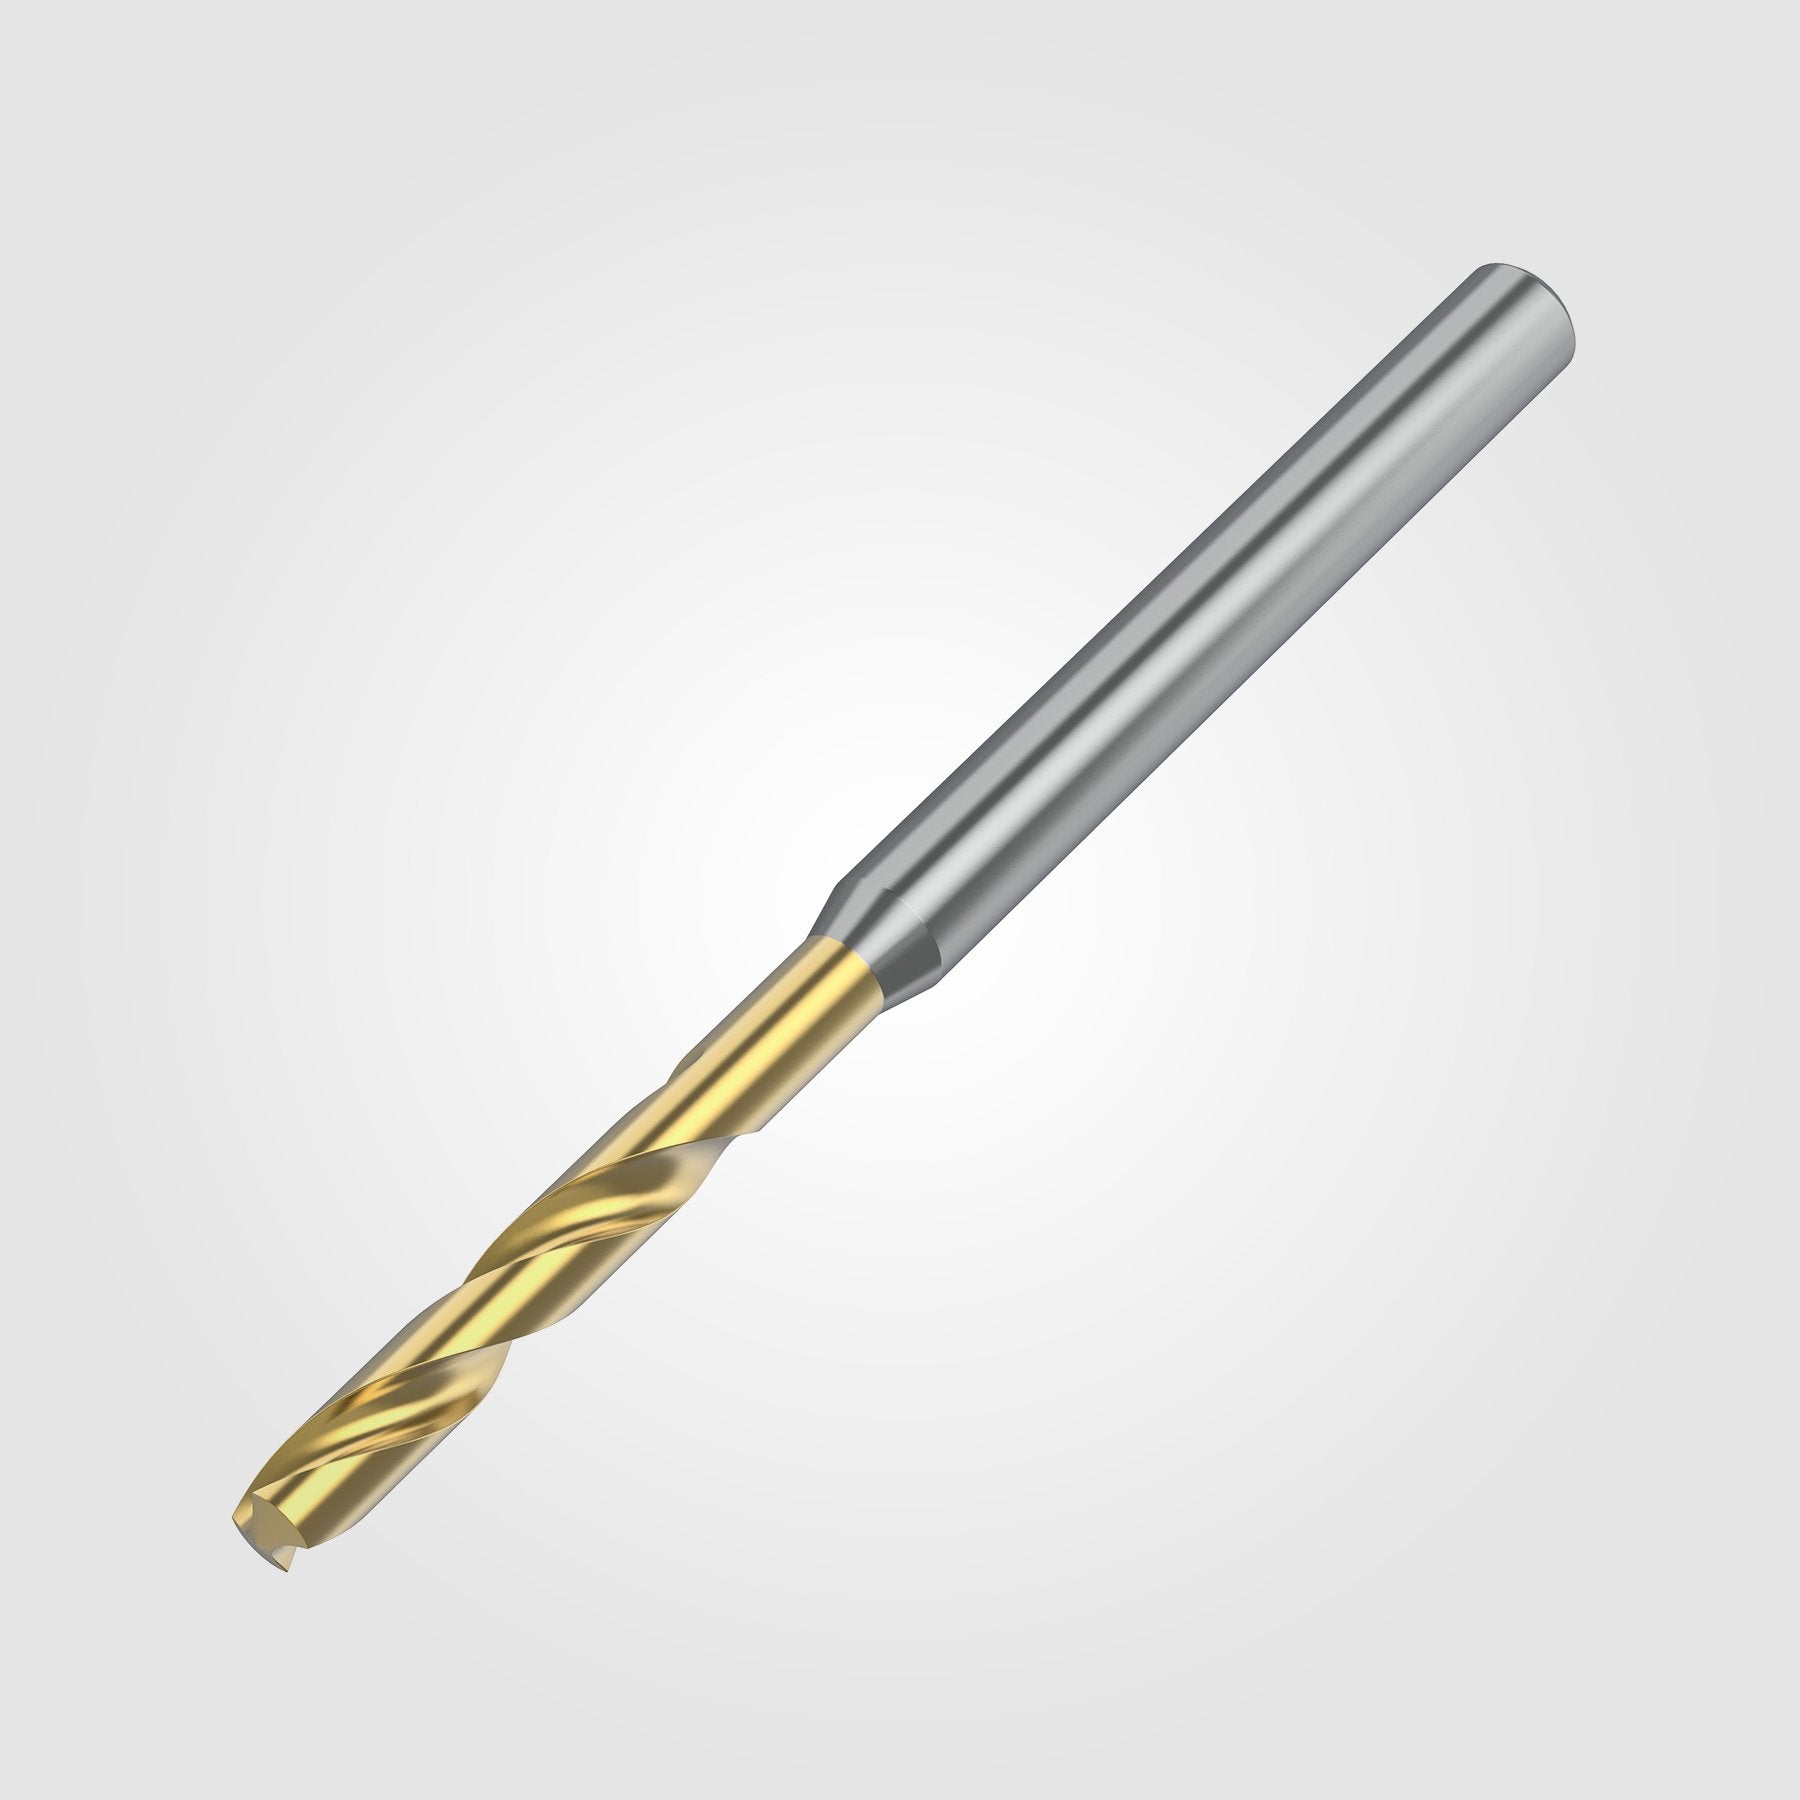 GOdrill (THROUGH COOLANT) | 12.8mm / .5039" / 3xD | SOLID CARBIDE DRILL | 4151238